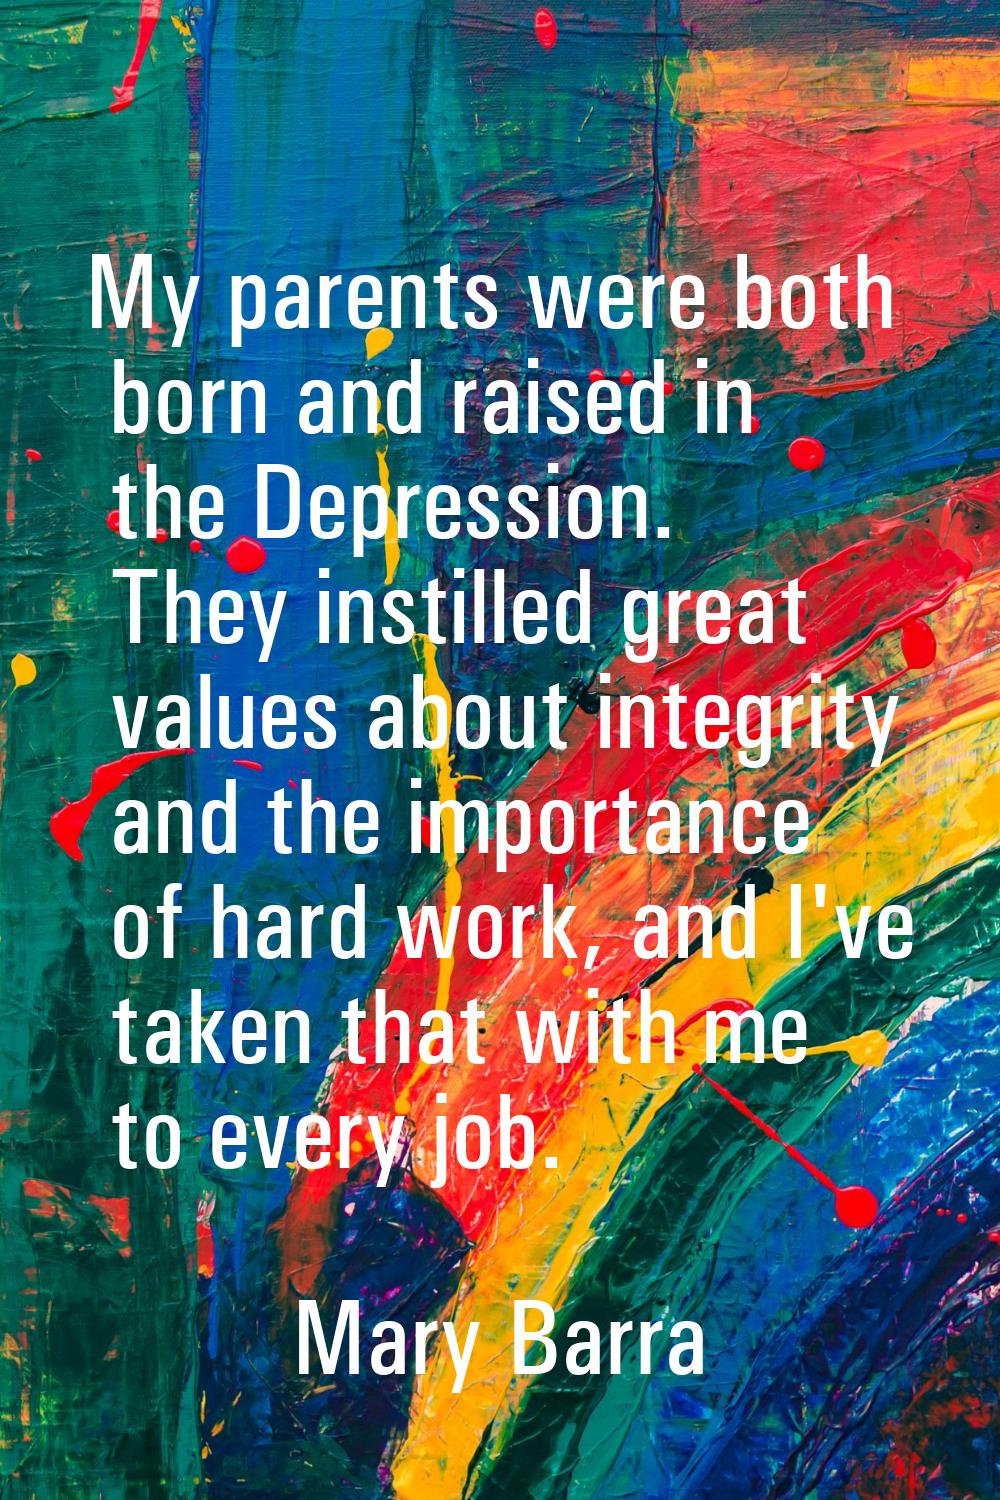 My parents were both born and raised in the Depression. They instilled great values about integrity